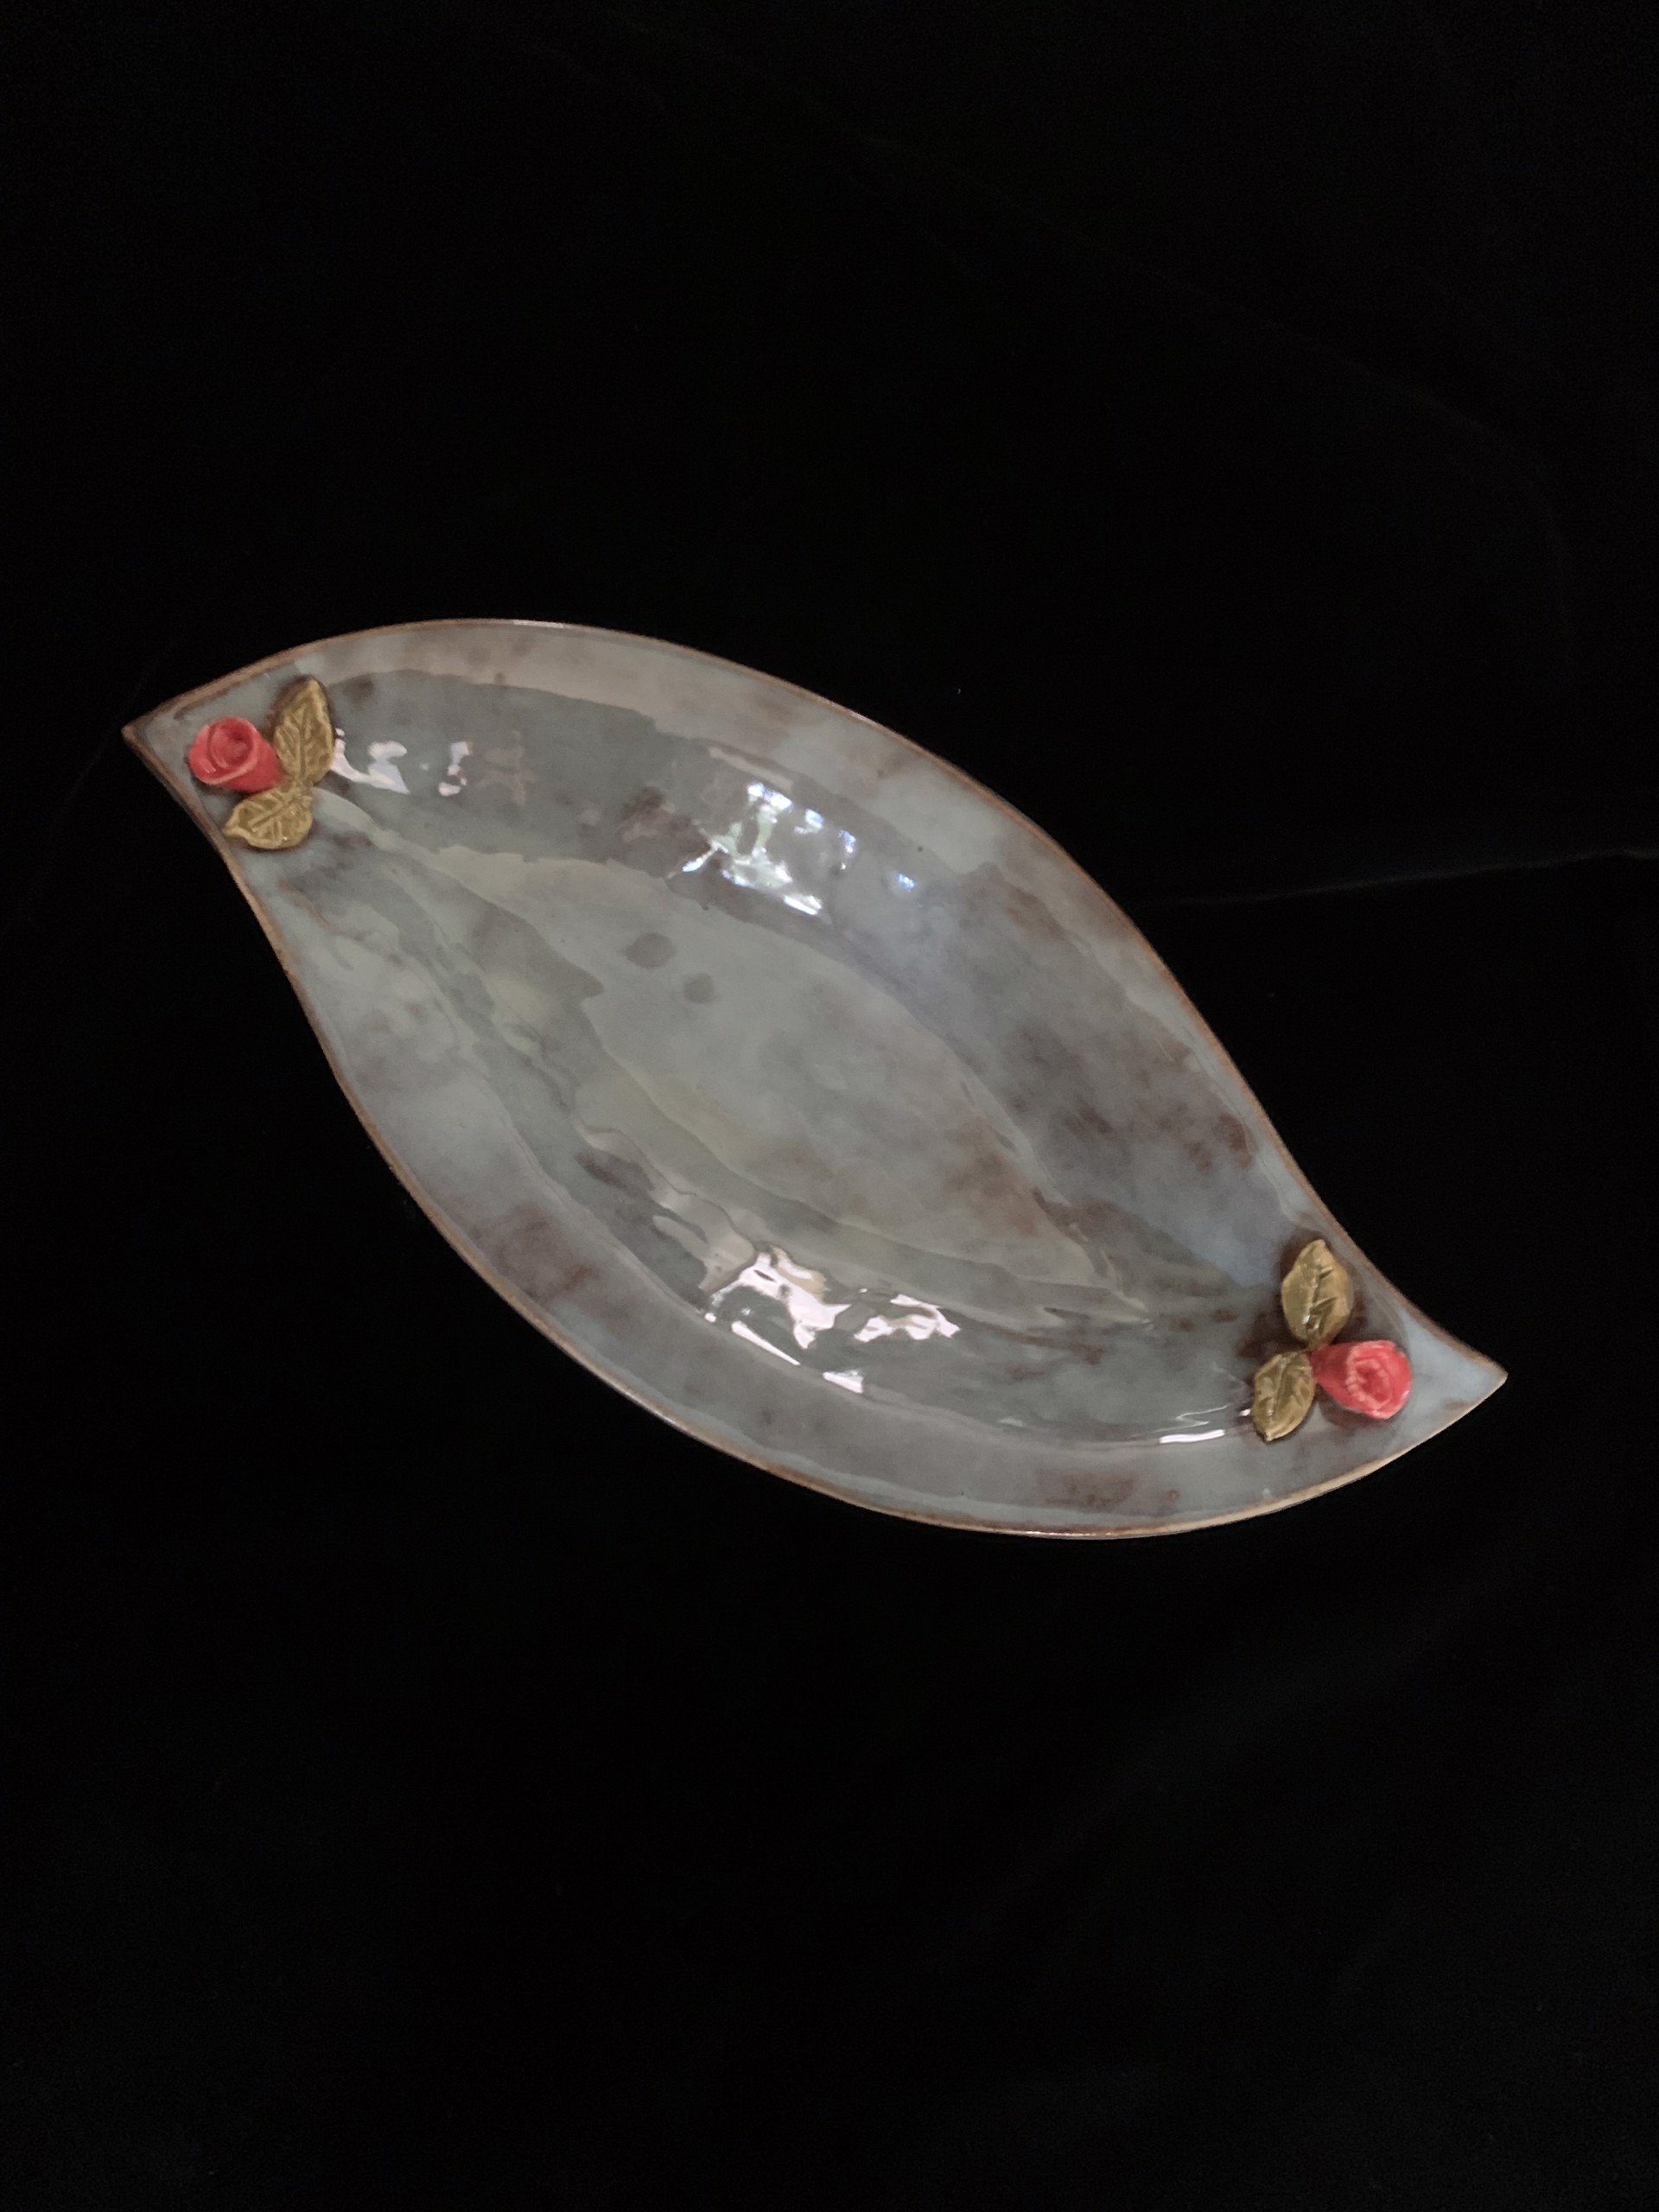 16 in Crescent Bowl with Roses, blue rutile by Michael Hagan